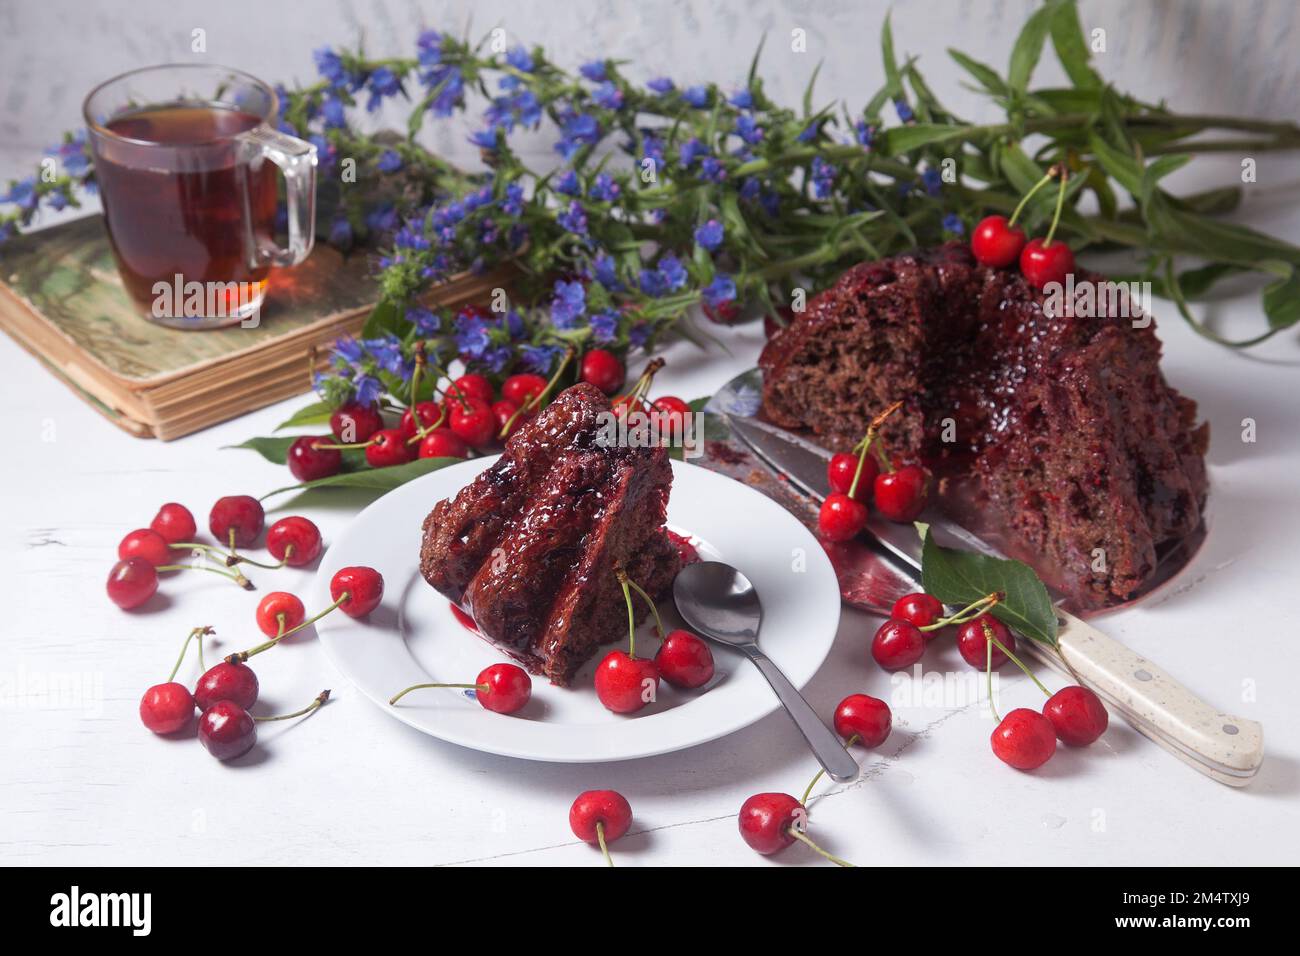 Composition on white background - delicious chocolate cake with sweet cherry, white plate with part of tart, cup of tea on vintage book  and branch of Stock Photo